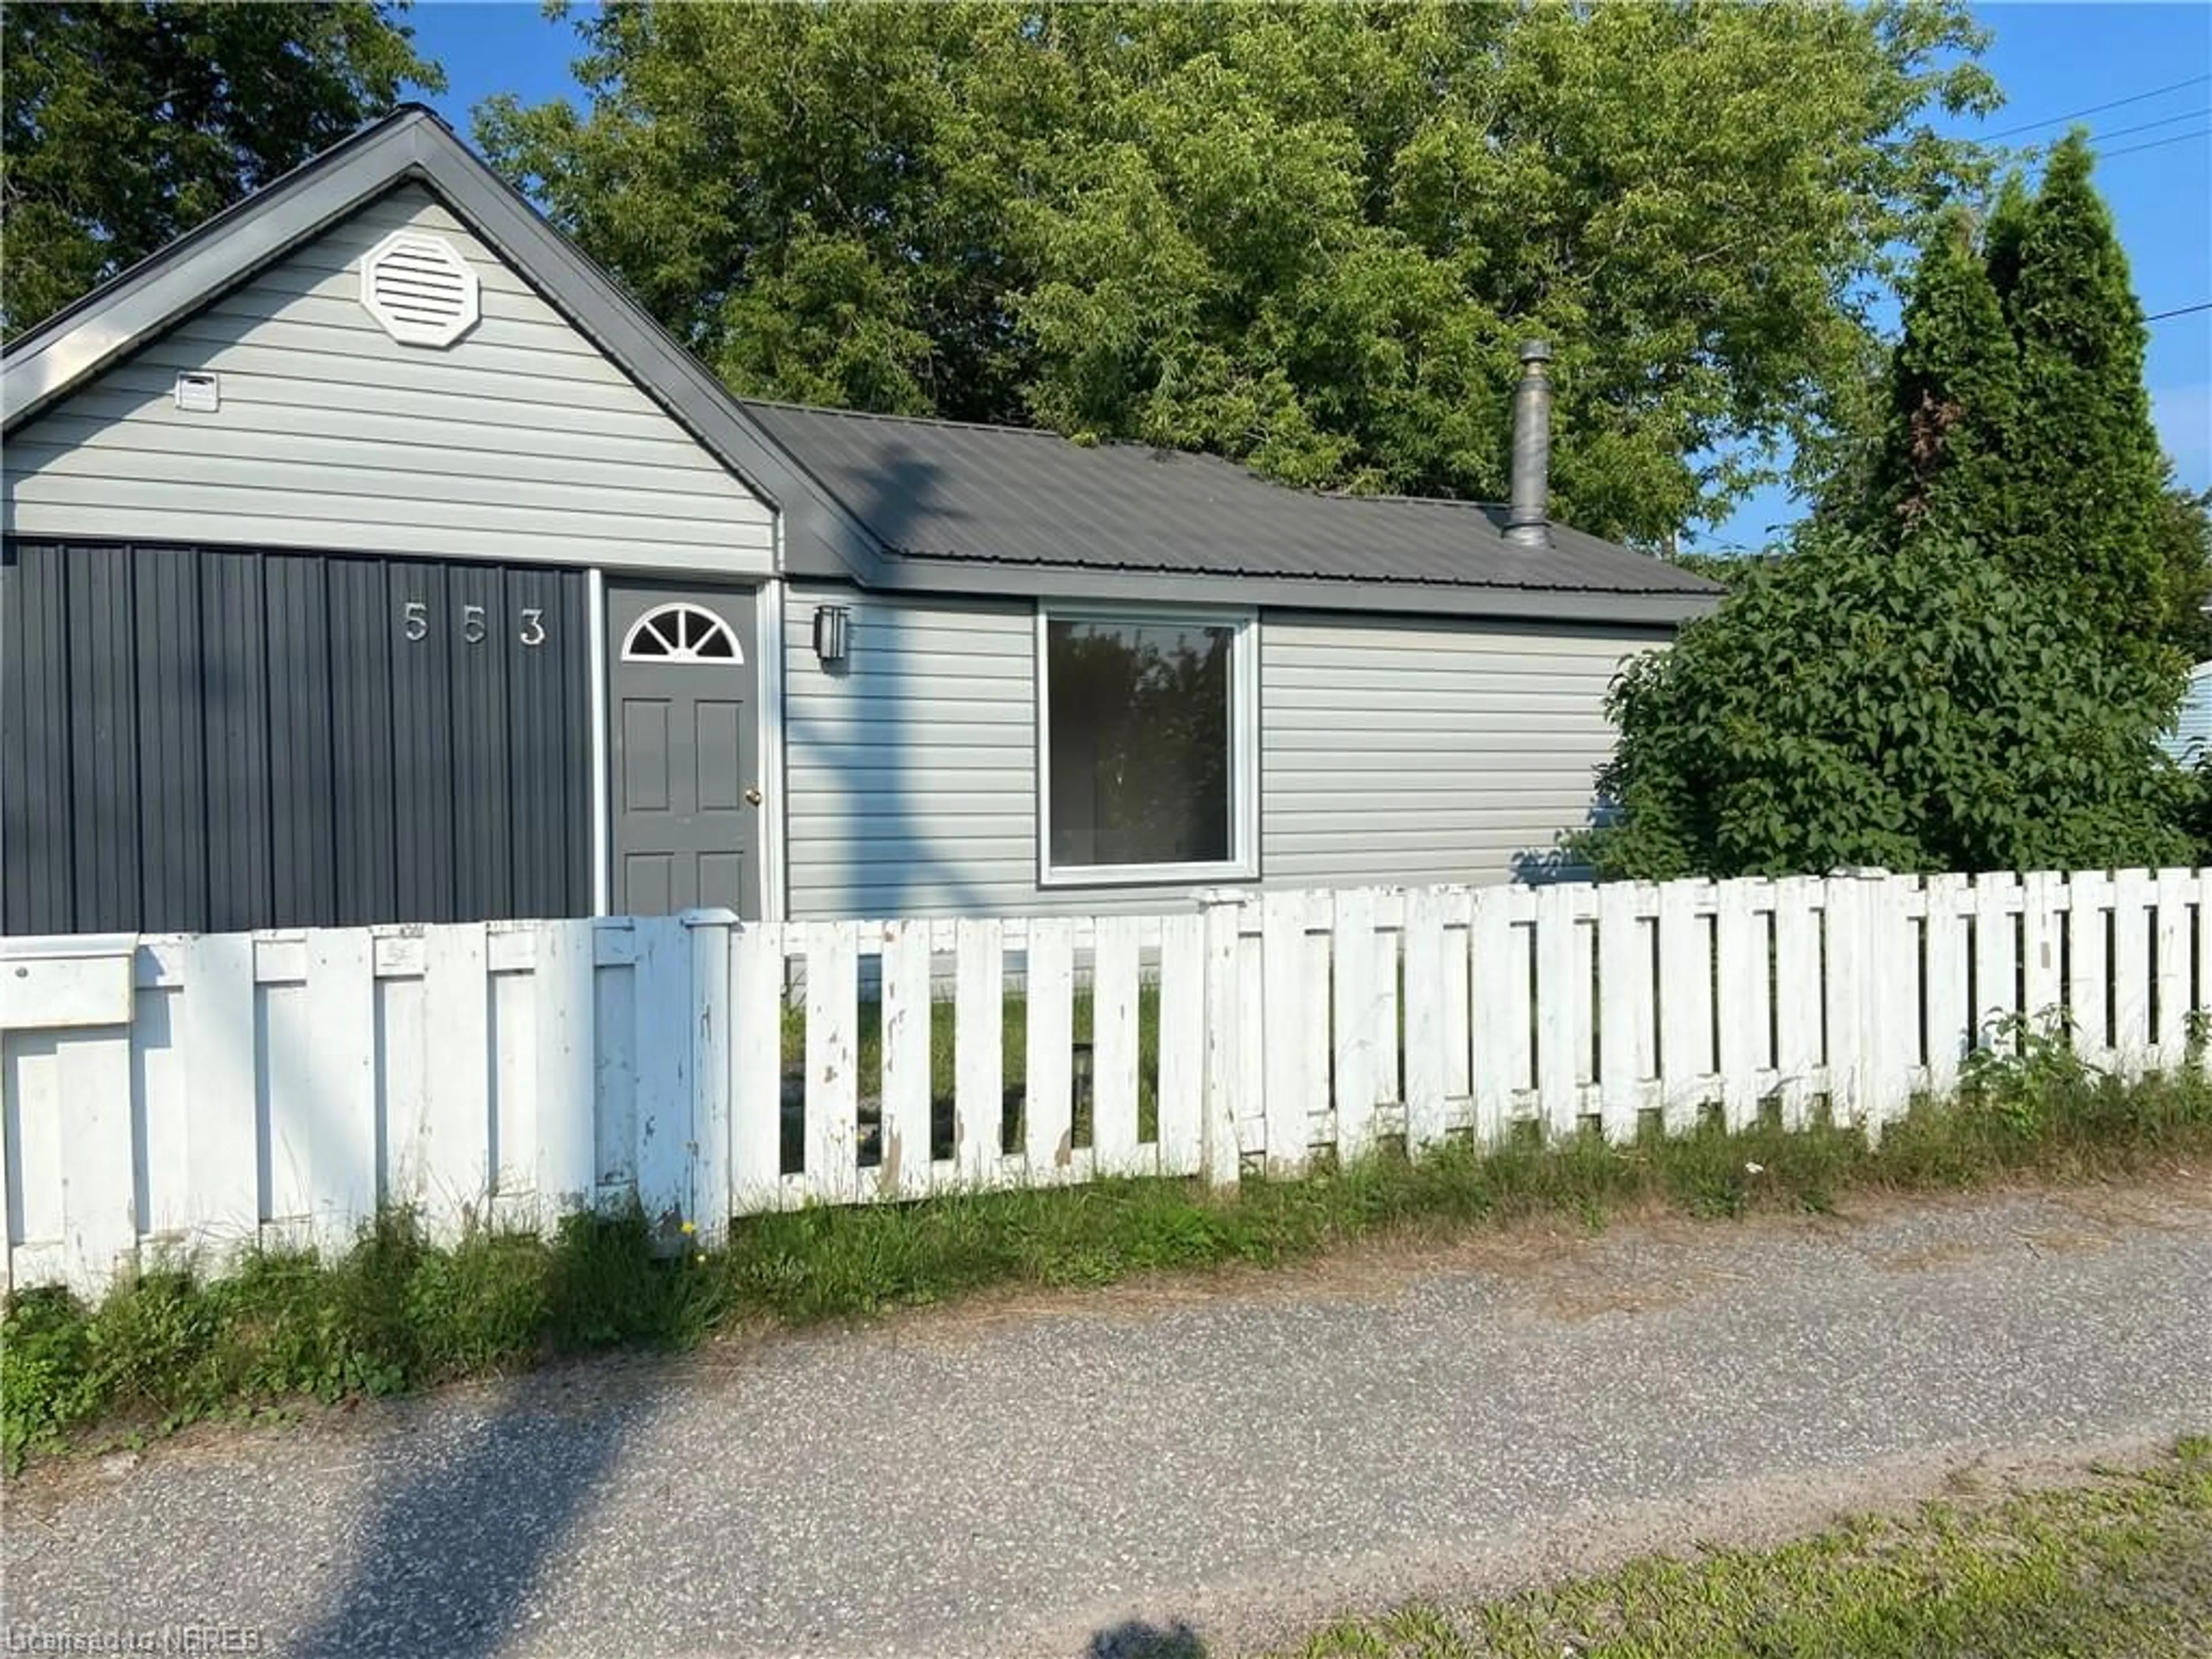 Cottage for 553 Laurier St, North Bay Ontario P1B 1T9